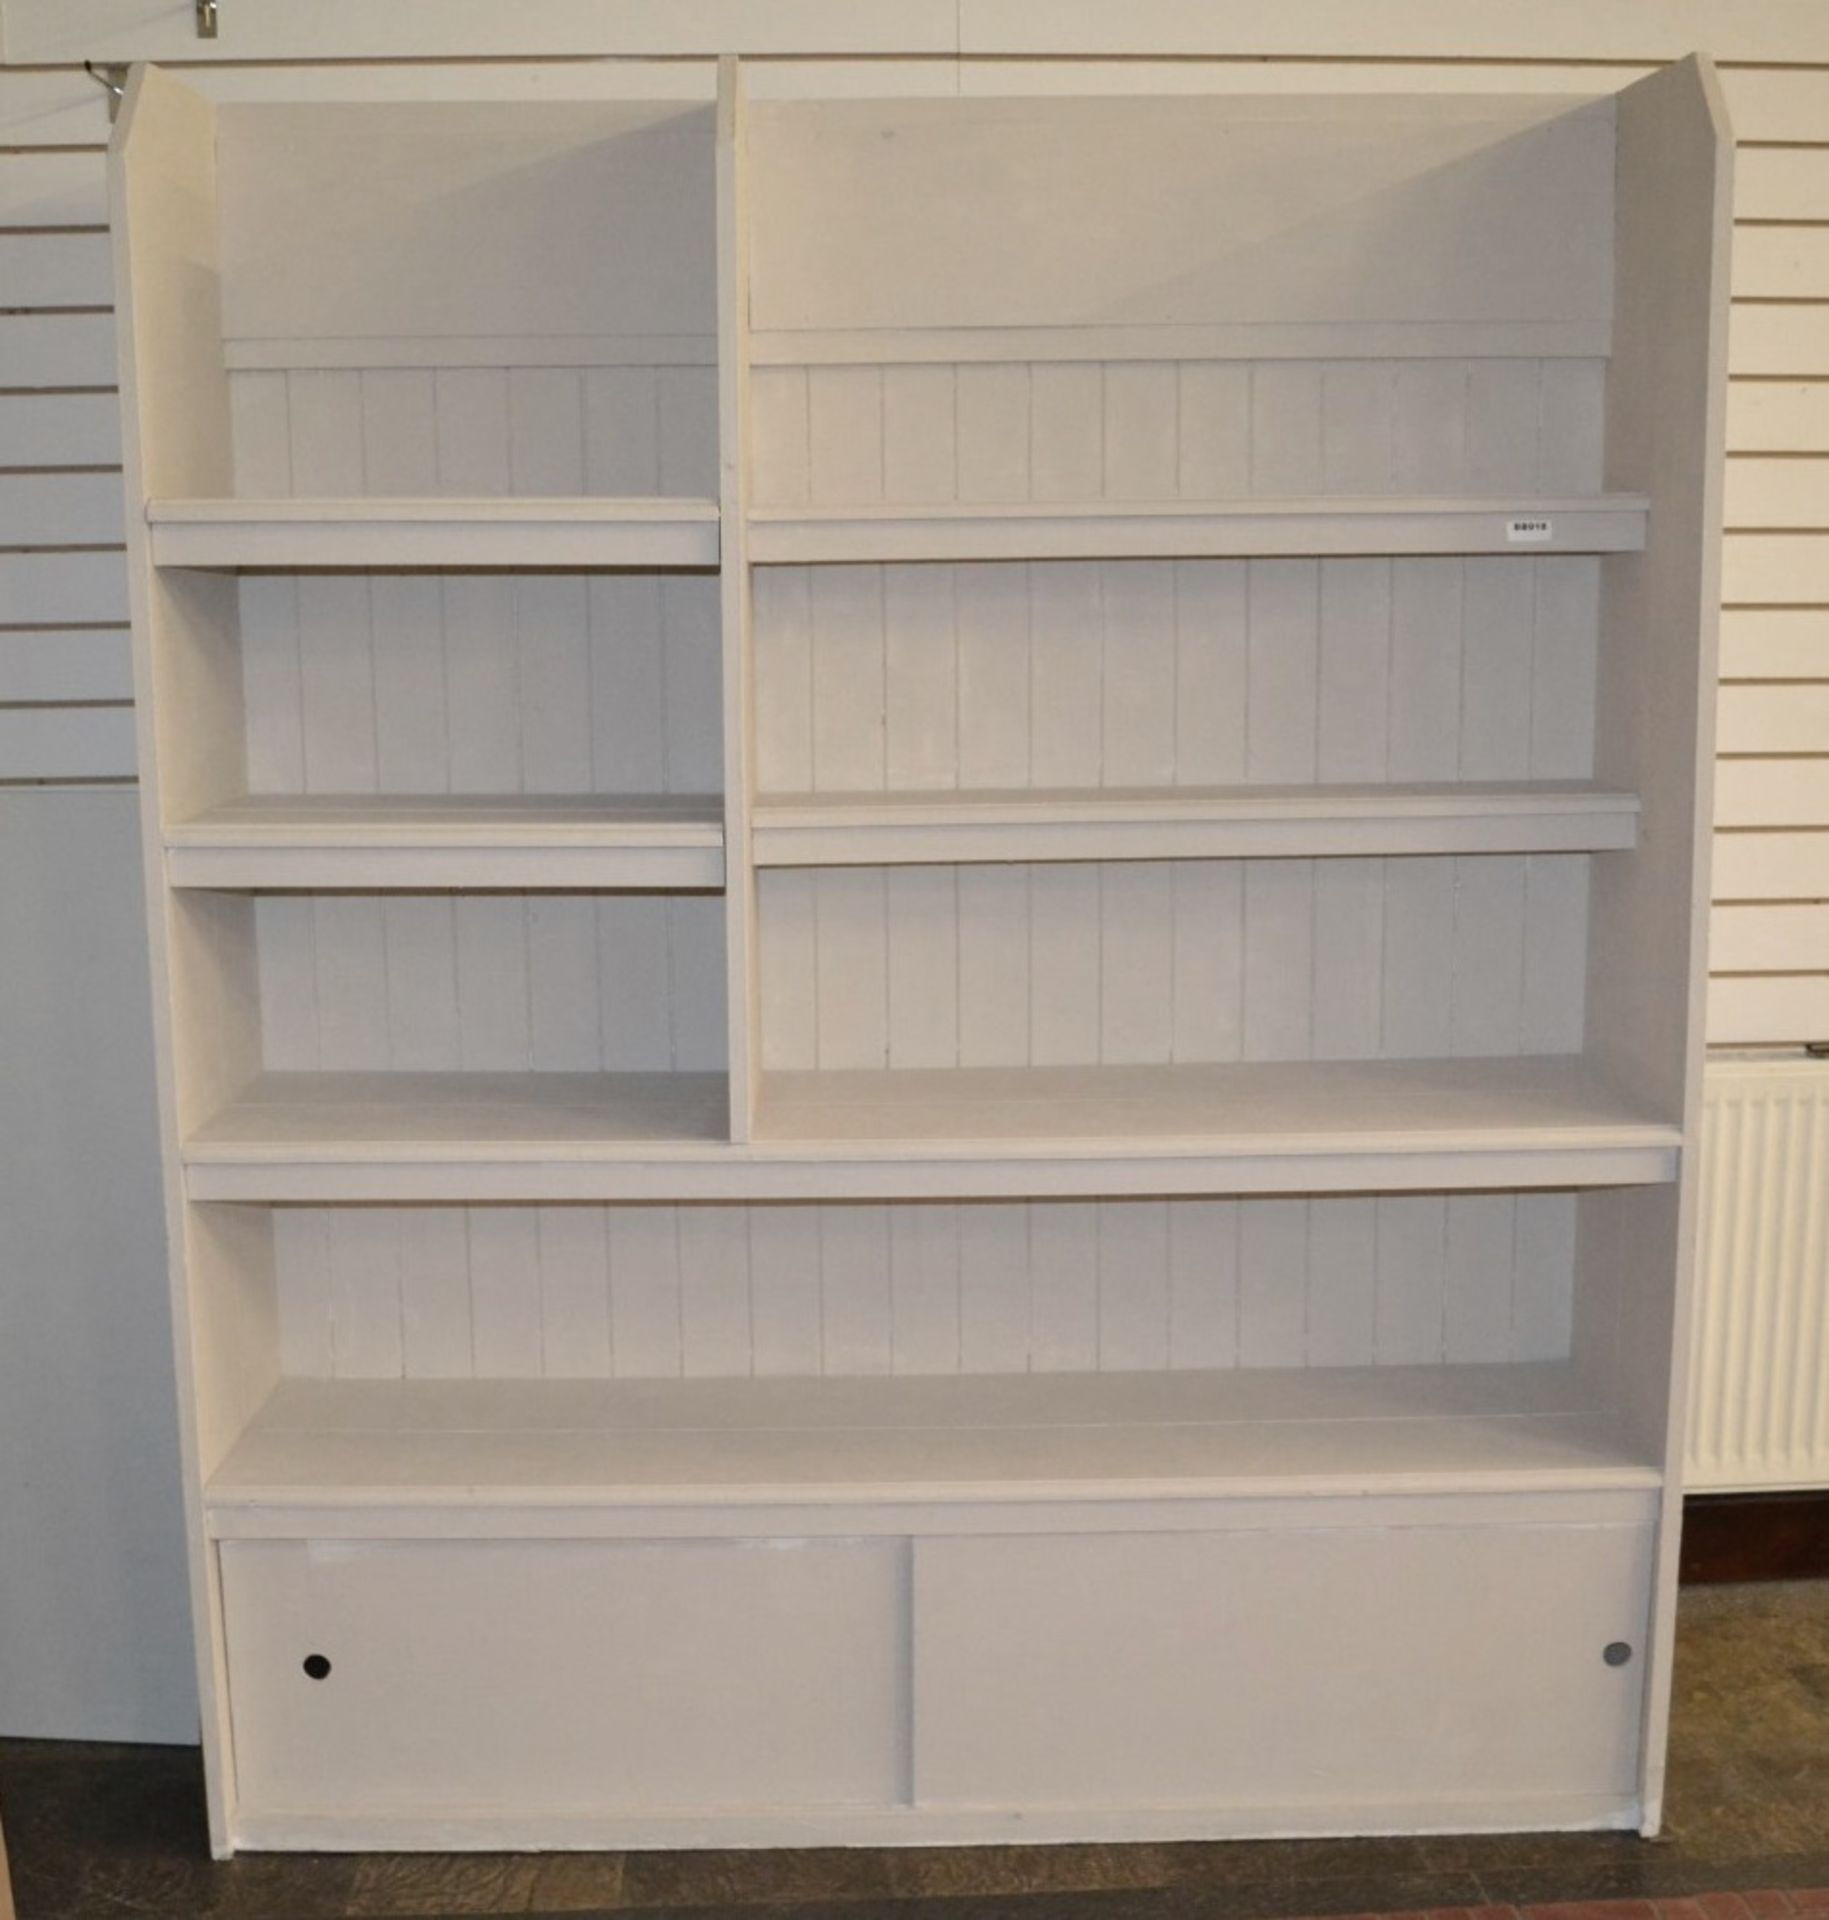 1 x Large 2-Metre Tall Painted Dresser Unit With 2 Sliding Door Storage And Paneled Back